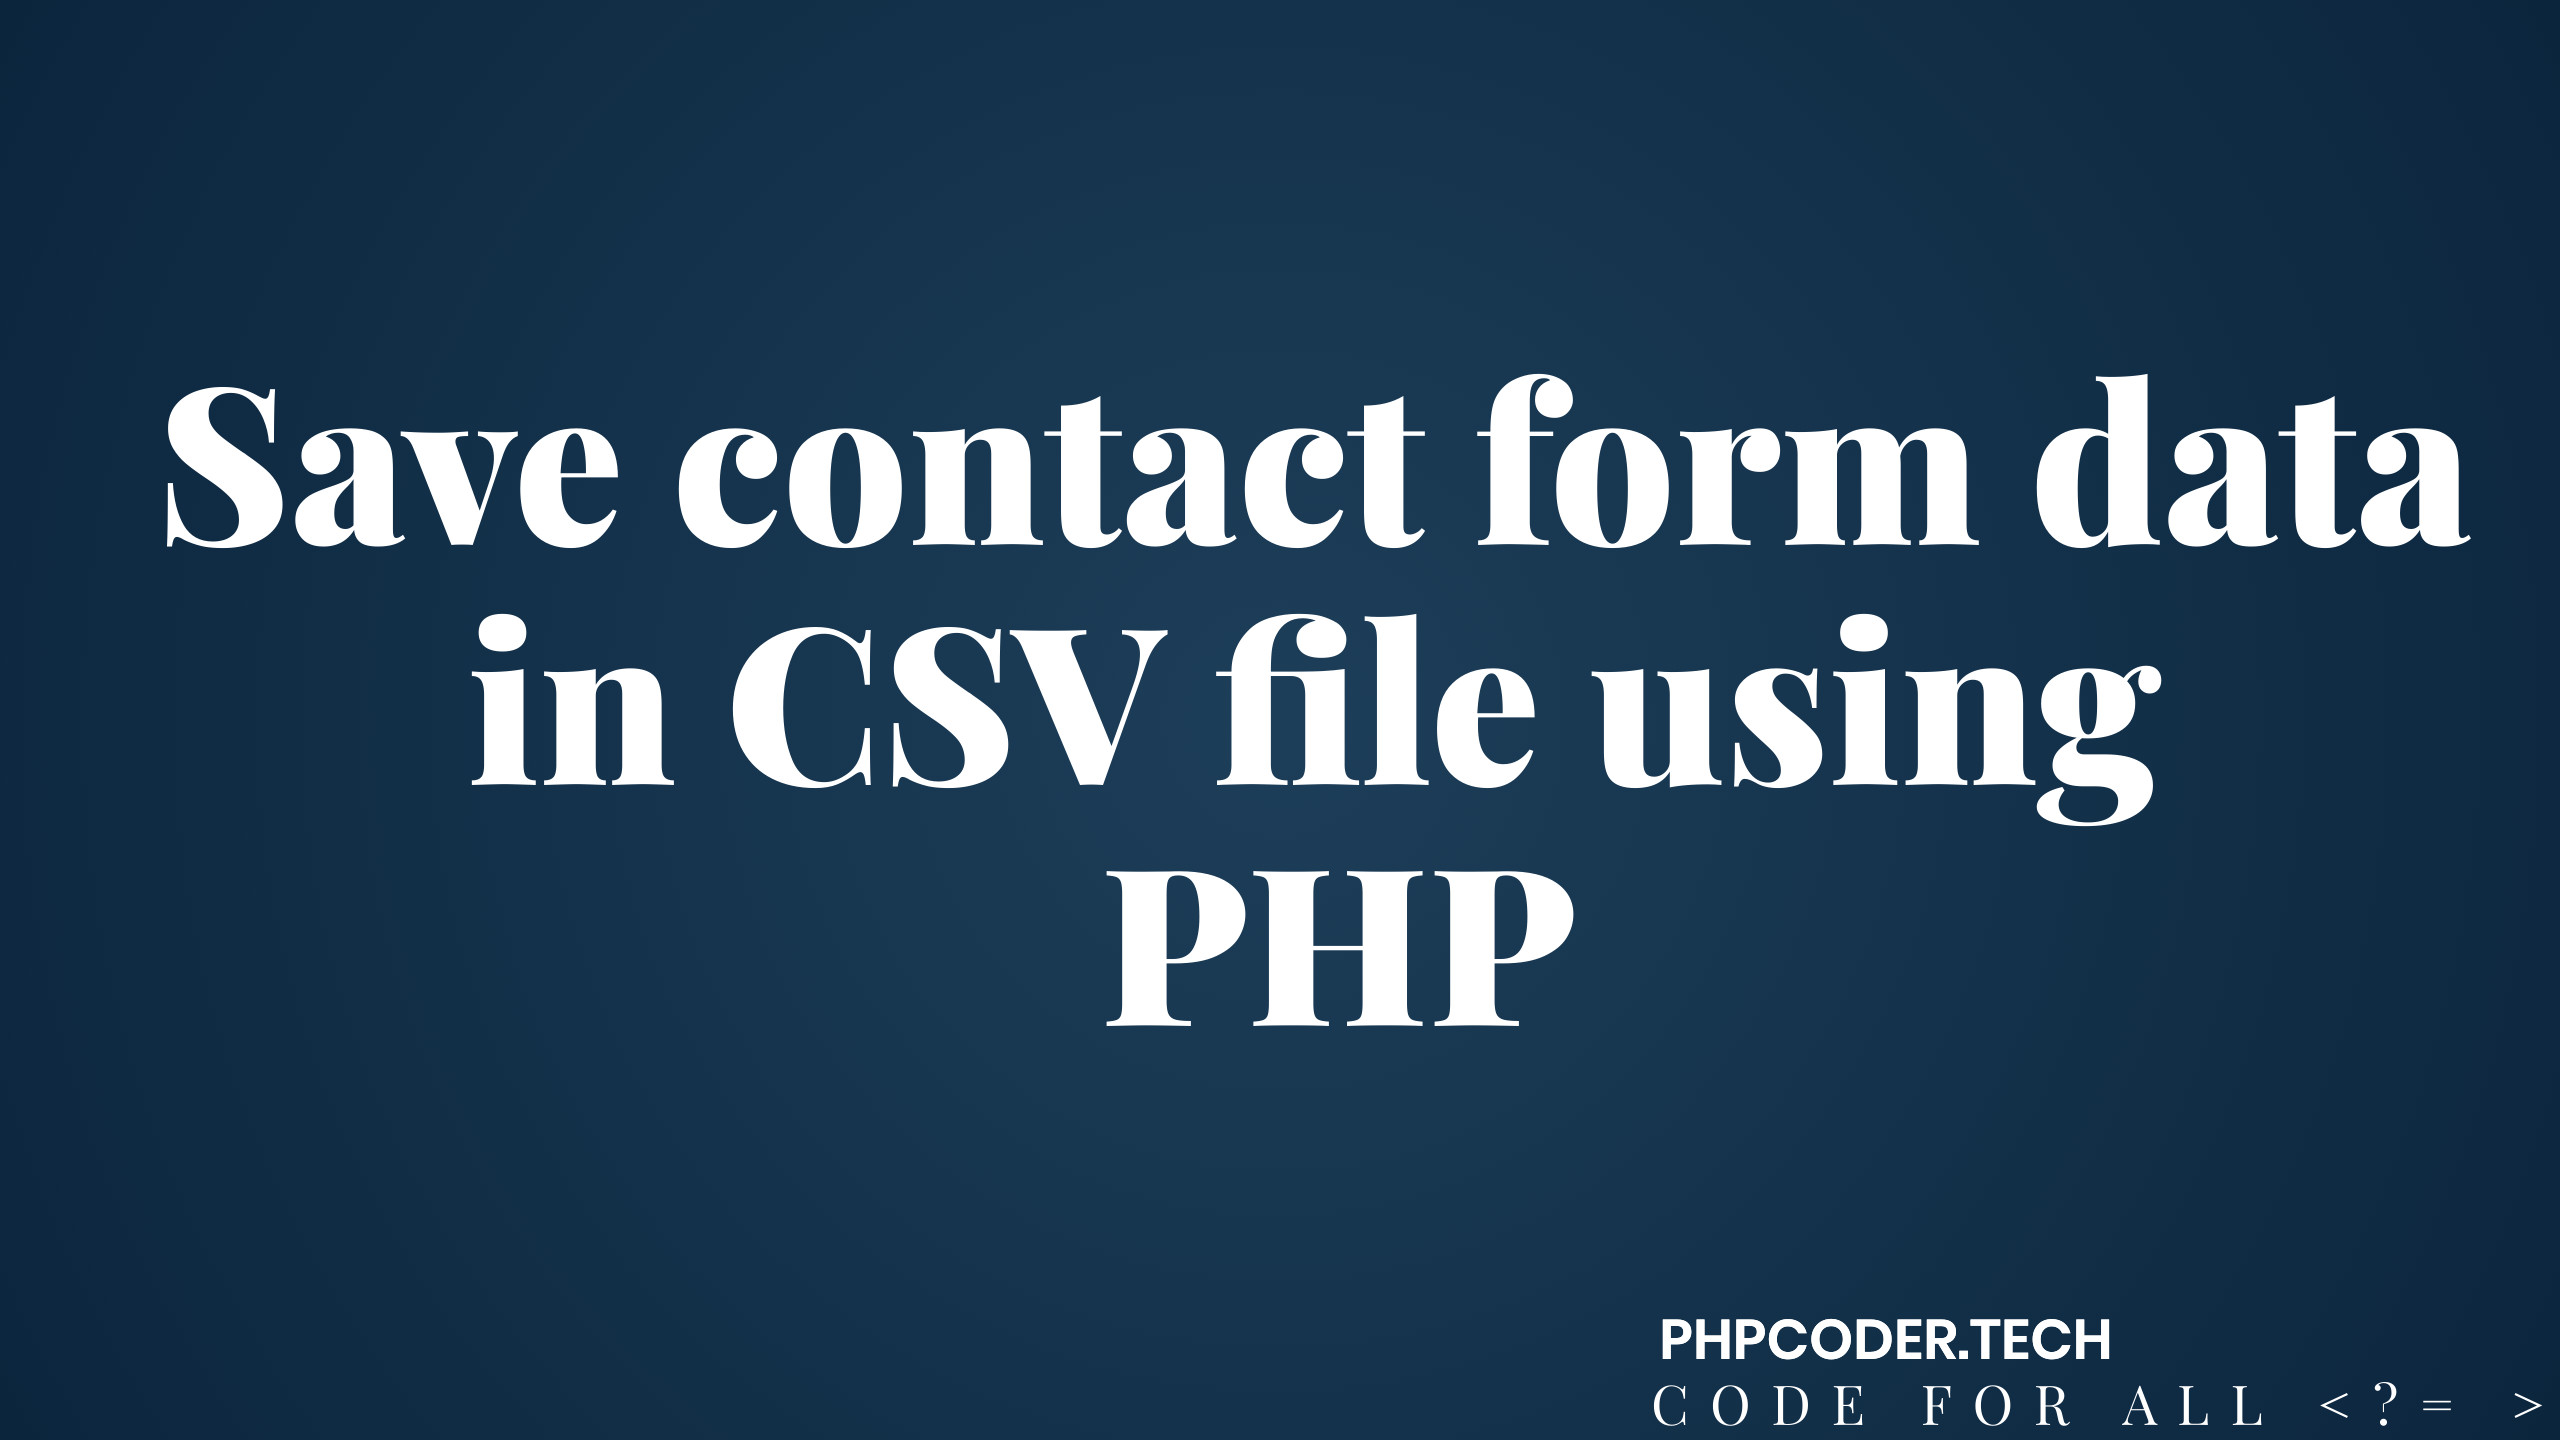 Save contact form data in CSV file using PHP